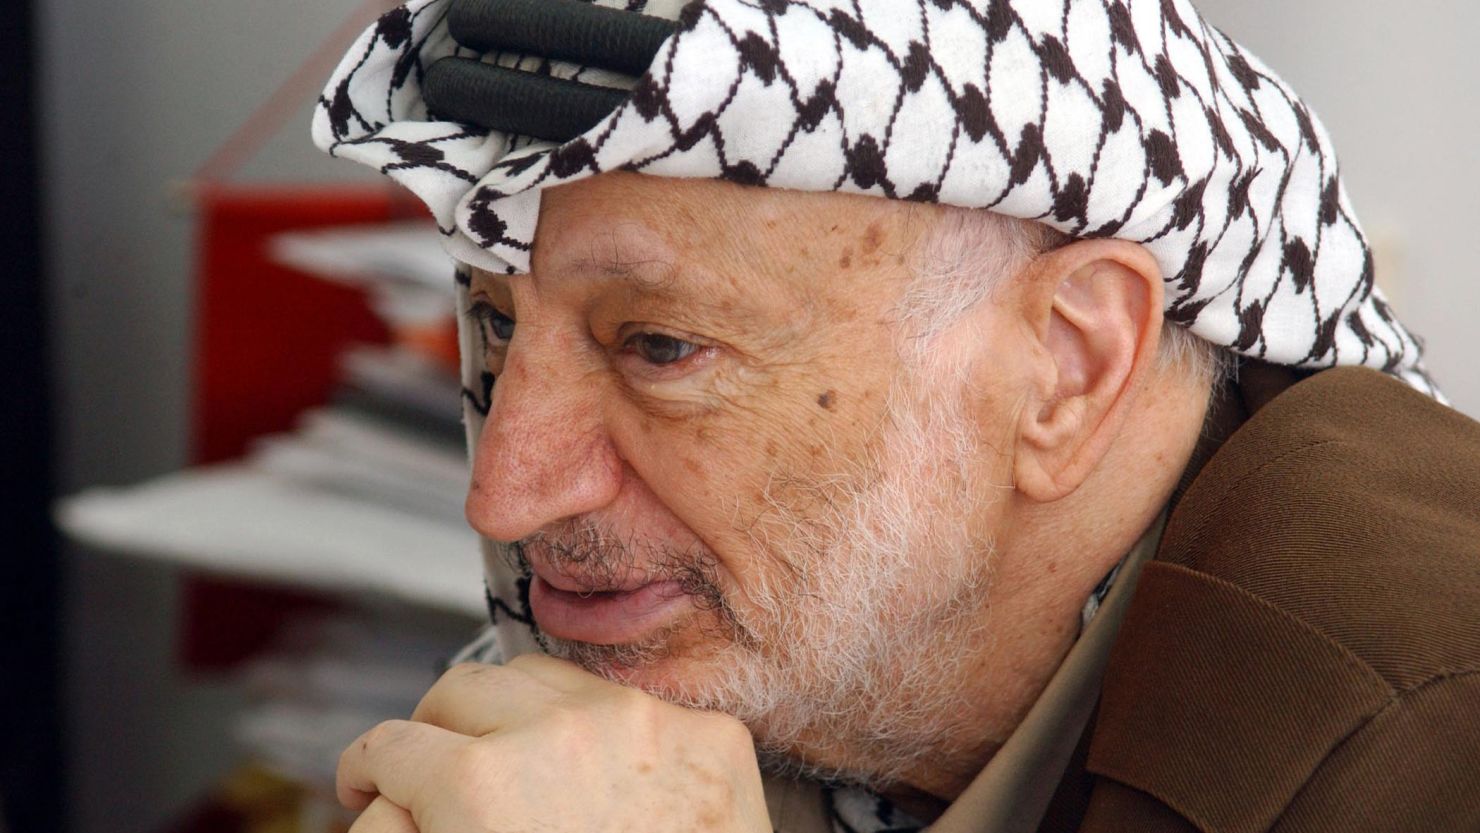 The inquiry comes after last month's discovery of high levels of a radioactive substance on some of Yasser Arafat's personal belongings.